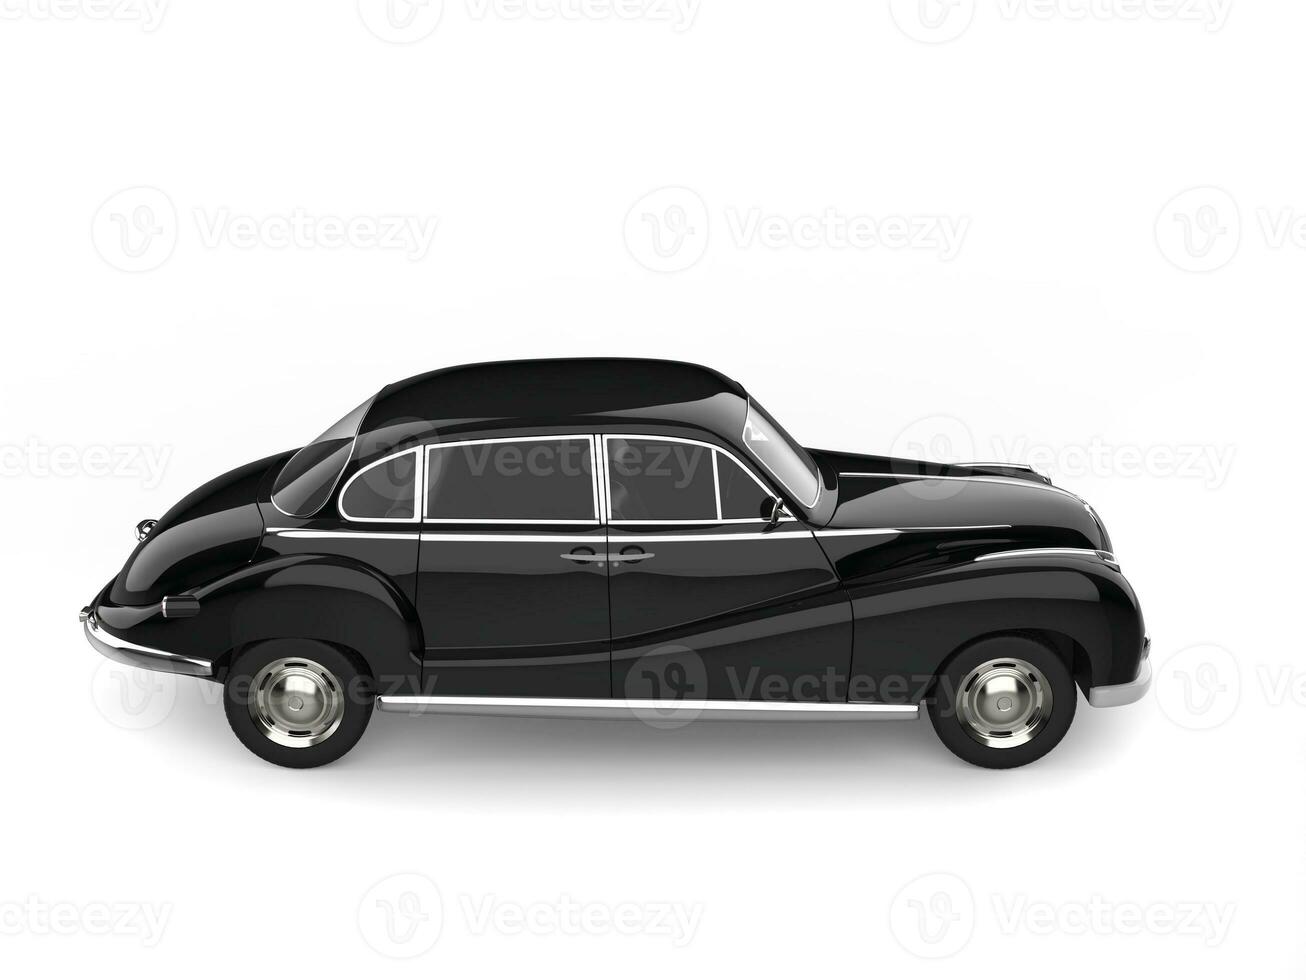 Vintage luxury car restored to mint conditon - top side view photo